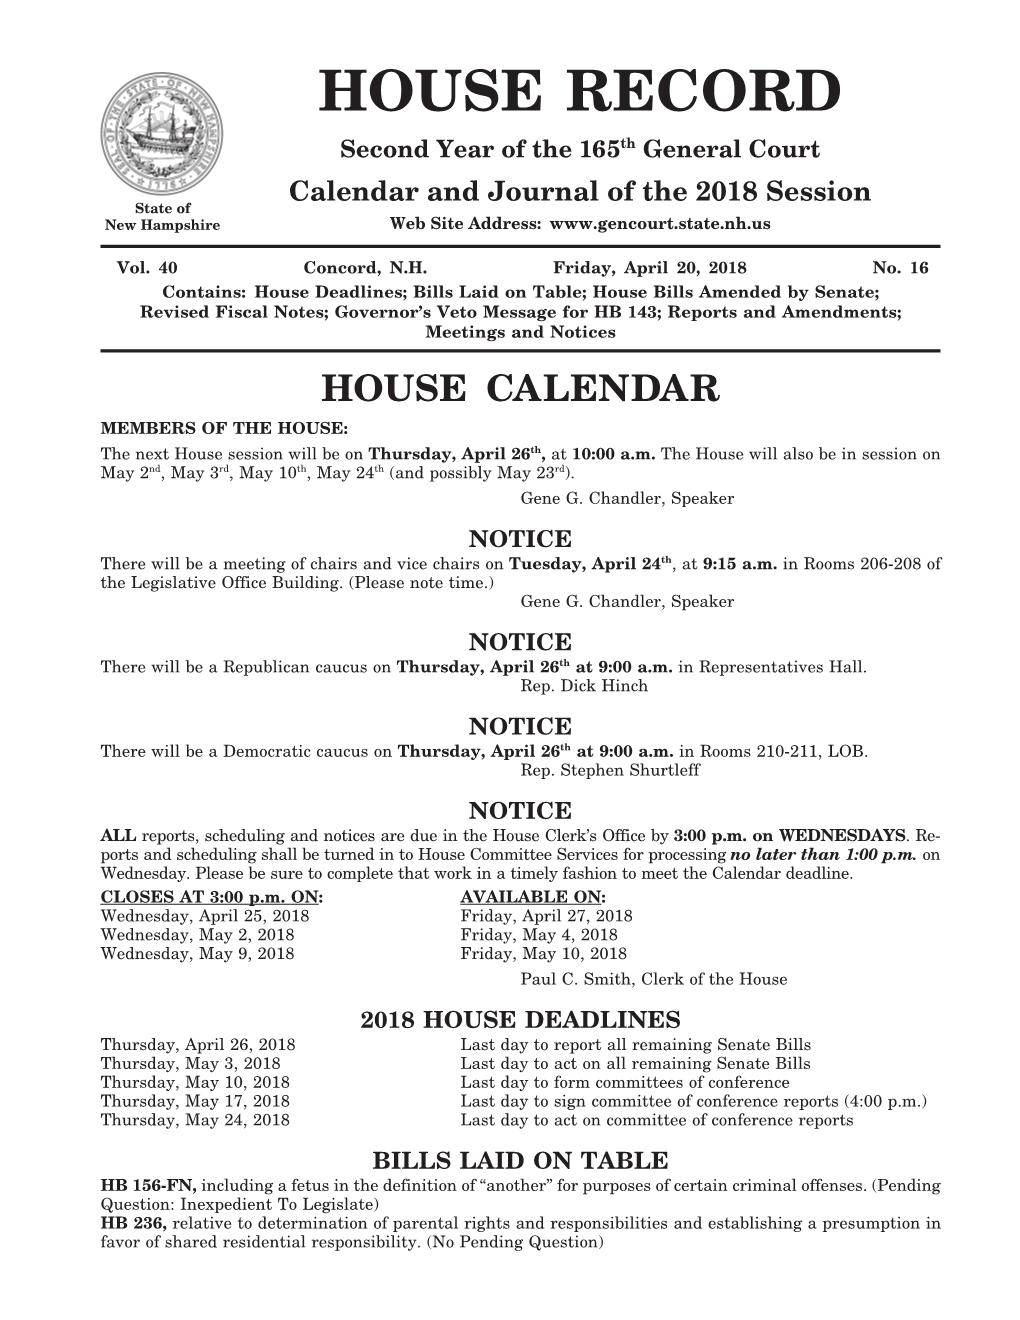 HOUSE RECORD Second Year of the 165Th General Court Calendar and Journal of the 2018 Session State of New Hampshire Web Site Address